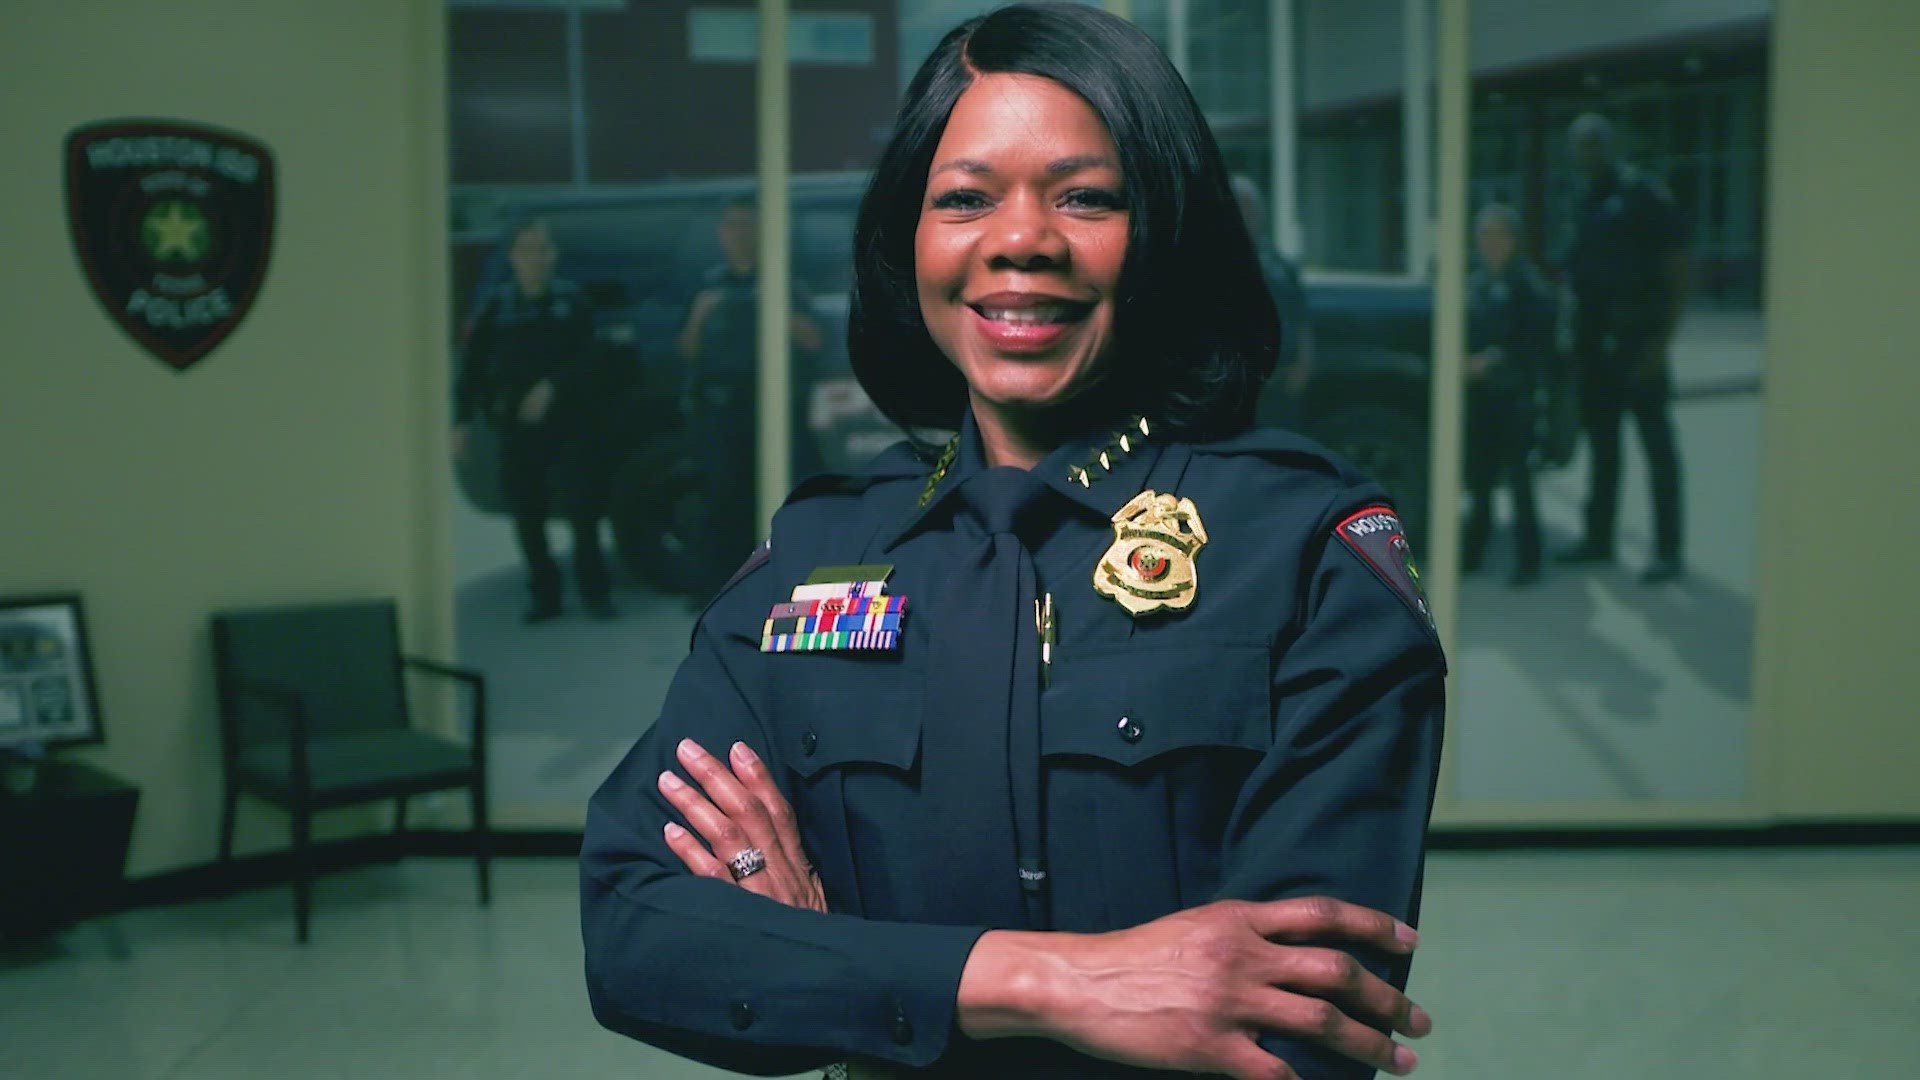 As Women's History Month comes to a close, we can't help but highlight Houston native Police Chief Shamara Garner.